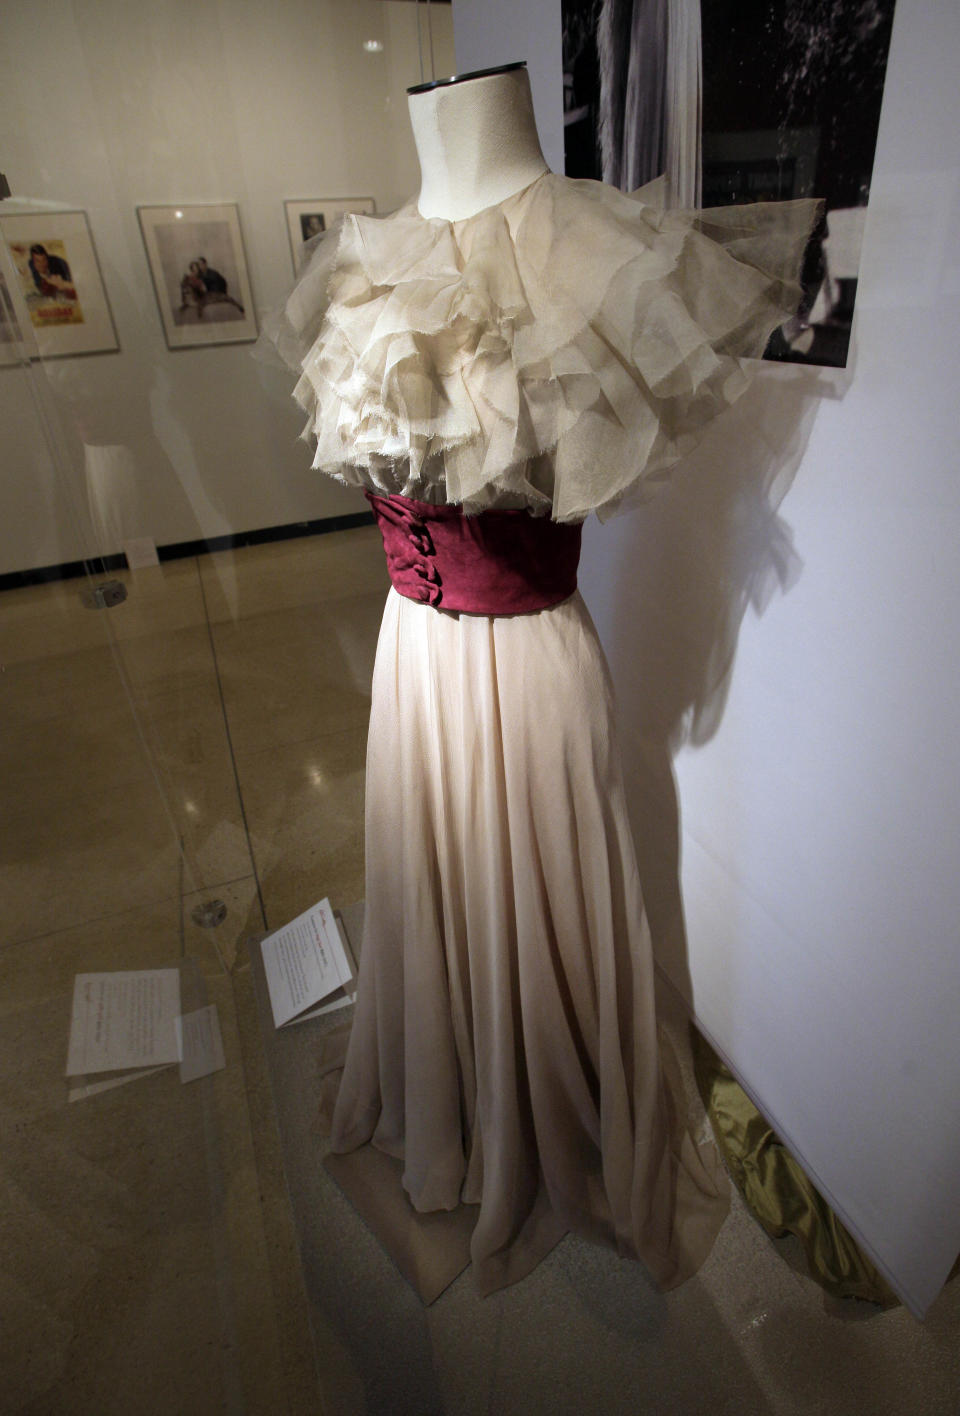 A design by Muriel King, from the 1937 RKO movie "Stage Door," is shown as part of the "Katharine Hepburn: Dressed for Stage and Screen" exhibit in the New York Public Library for the Performing Arts at Lincoln Center, Tuesday, Oct. 16, 2012. (AP Photo/Richard Drew)